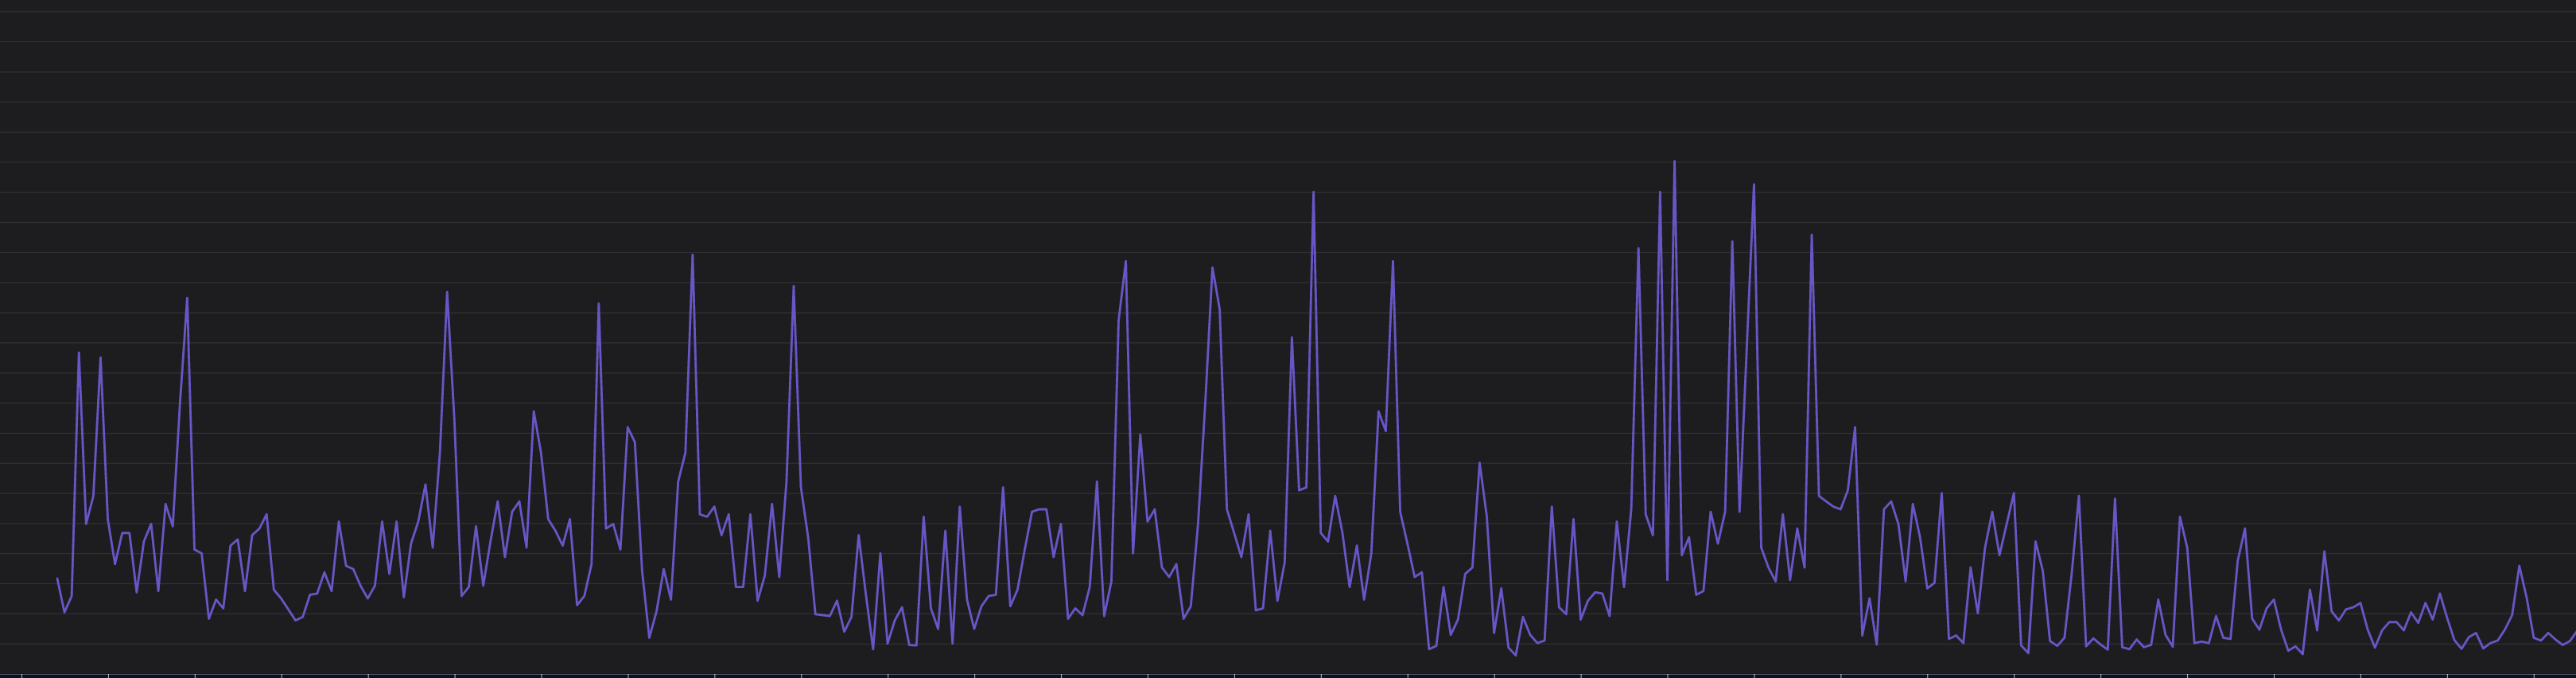 Event Loop Blocker p99 latency over time